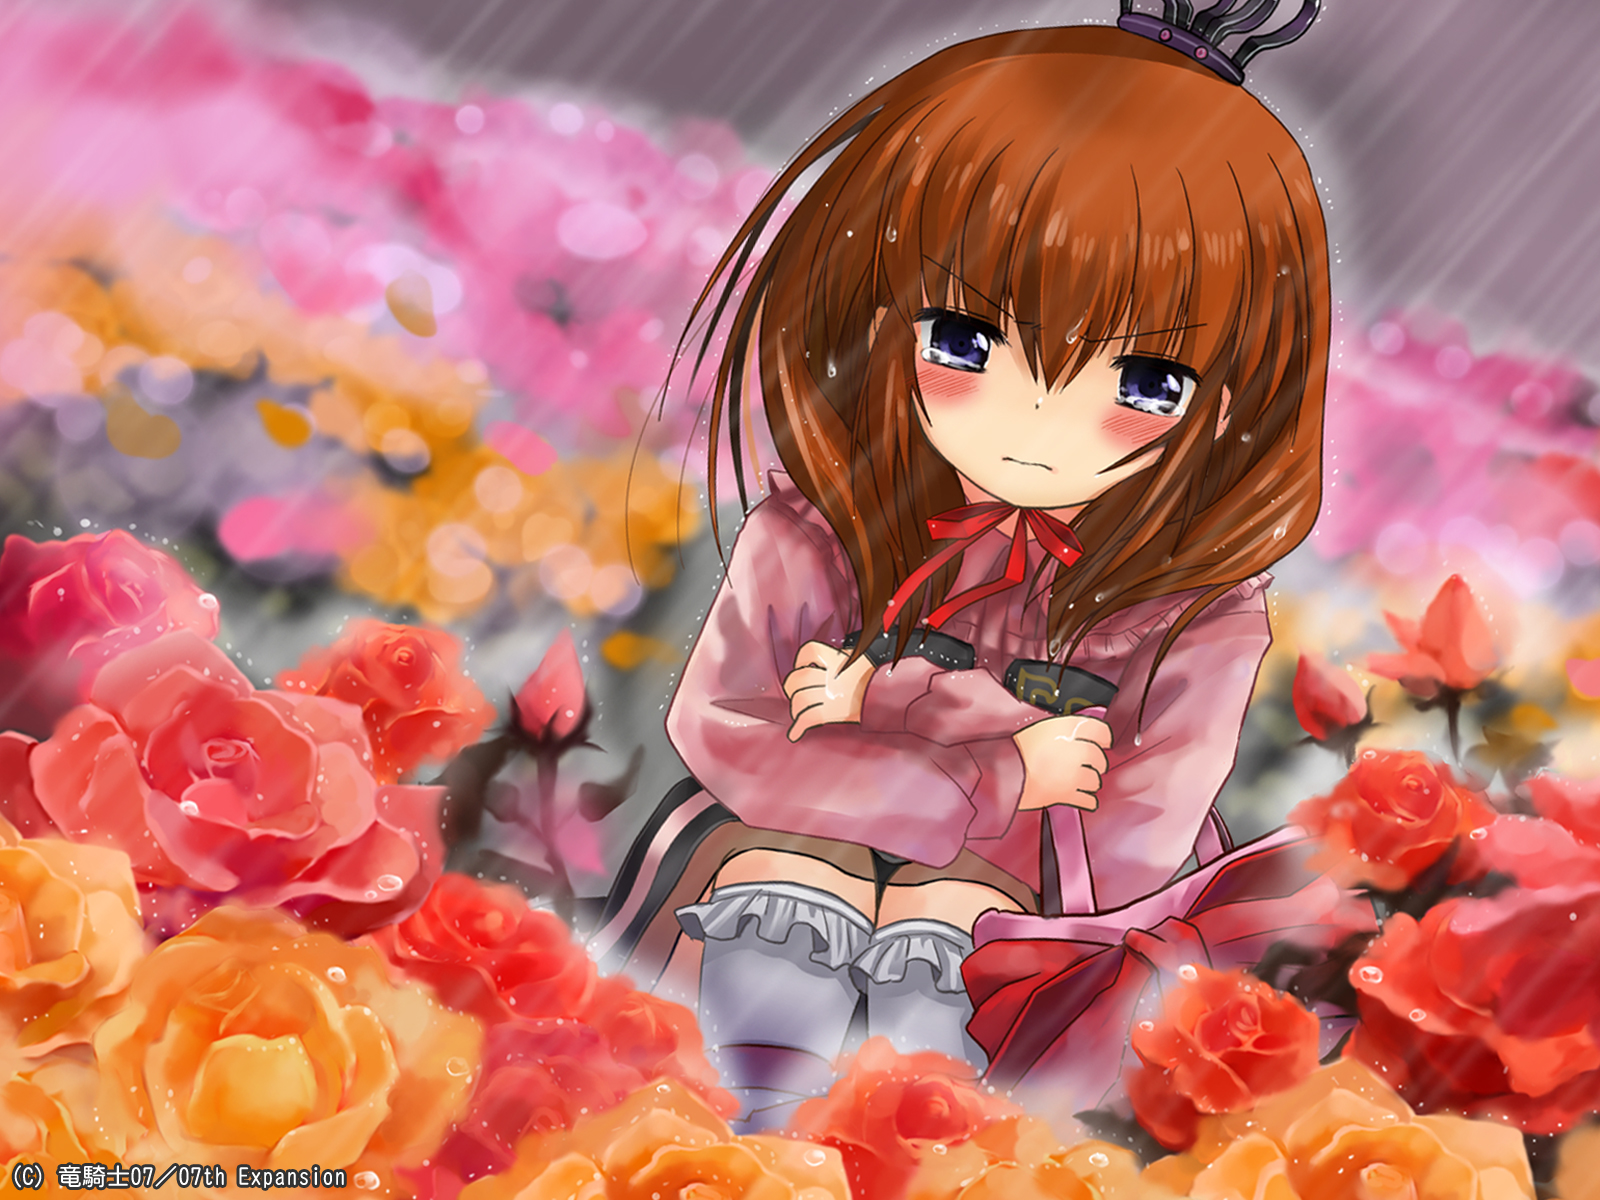 Maria, a charming character from the anime Umineko: When They Cry, adorns this desktop wallpaper.